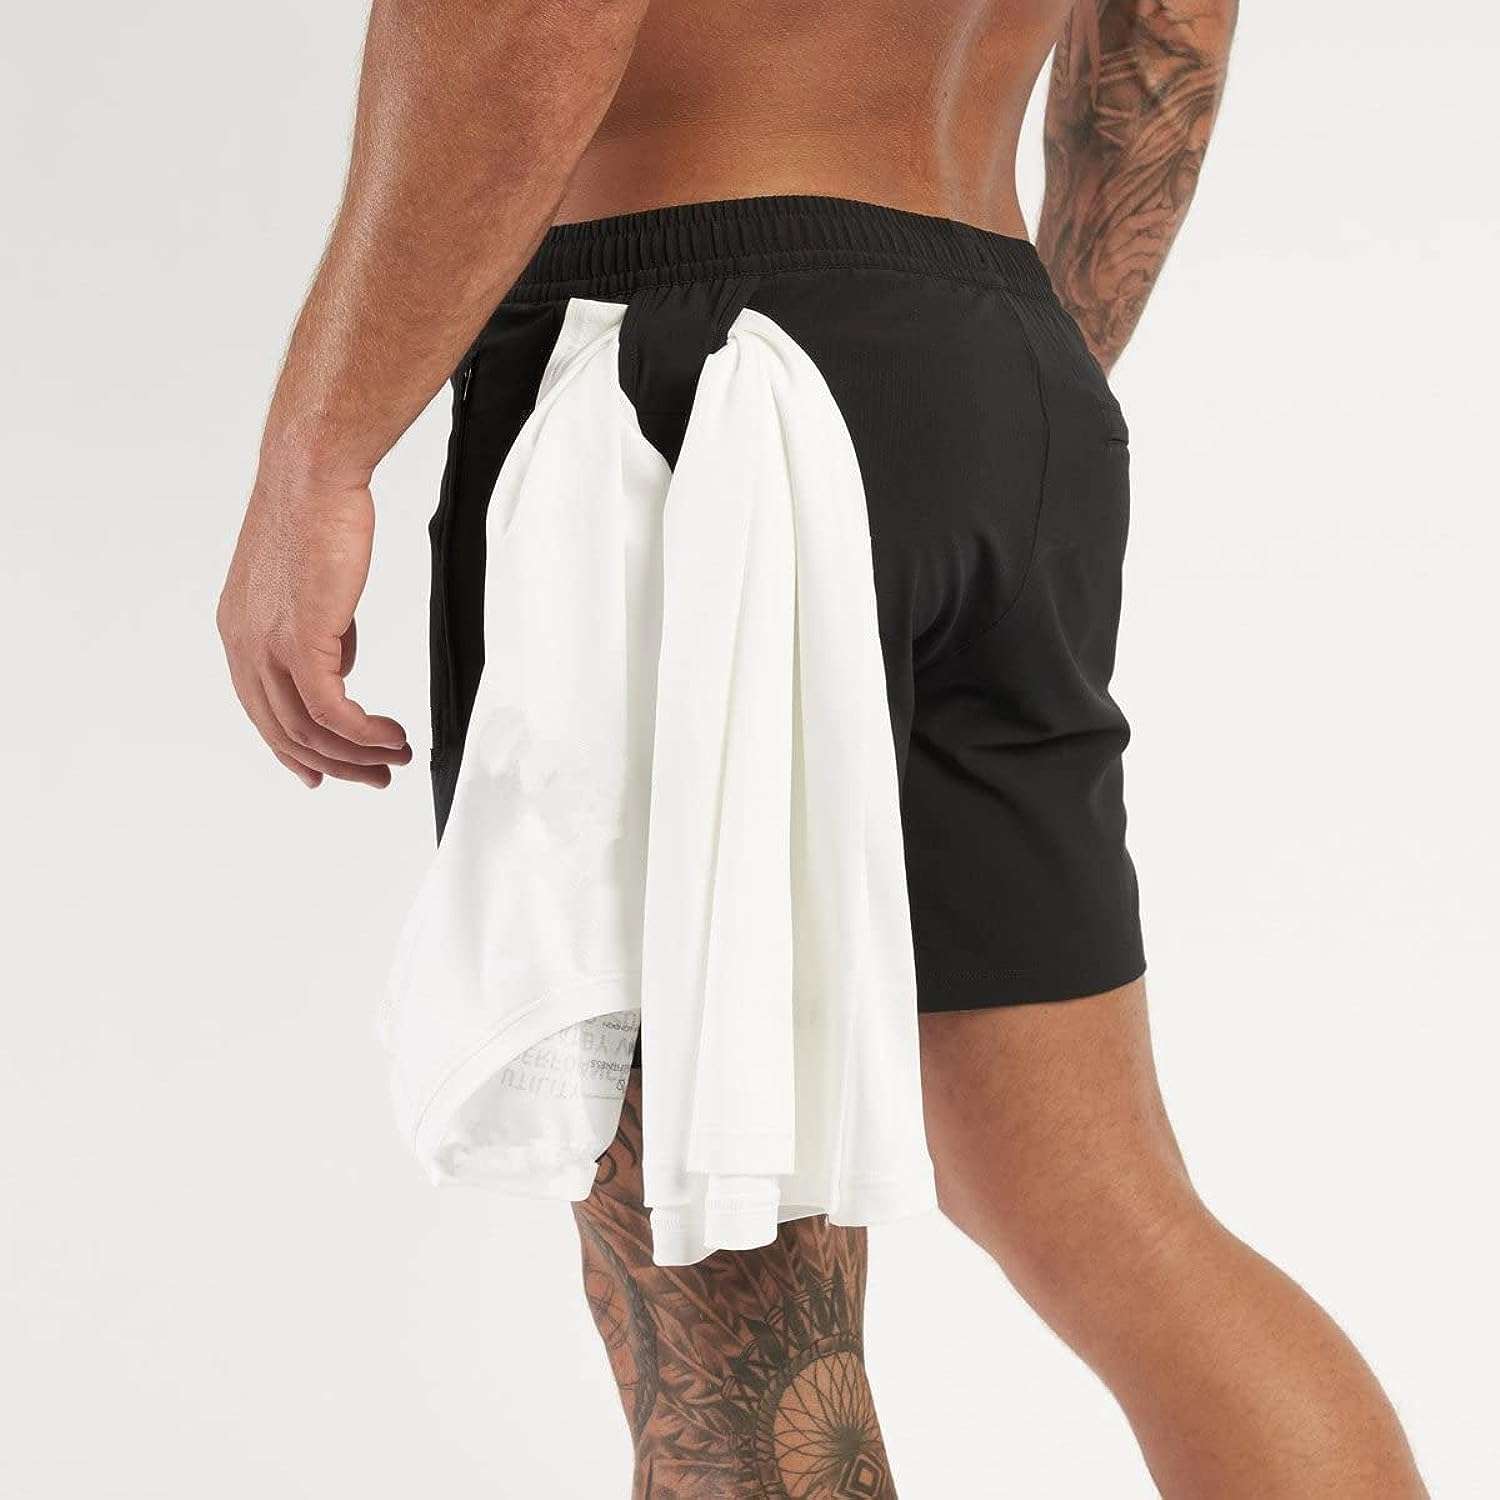 Muscle Killer Men's Gym Shorts Review - Explore Your Fitness